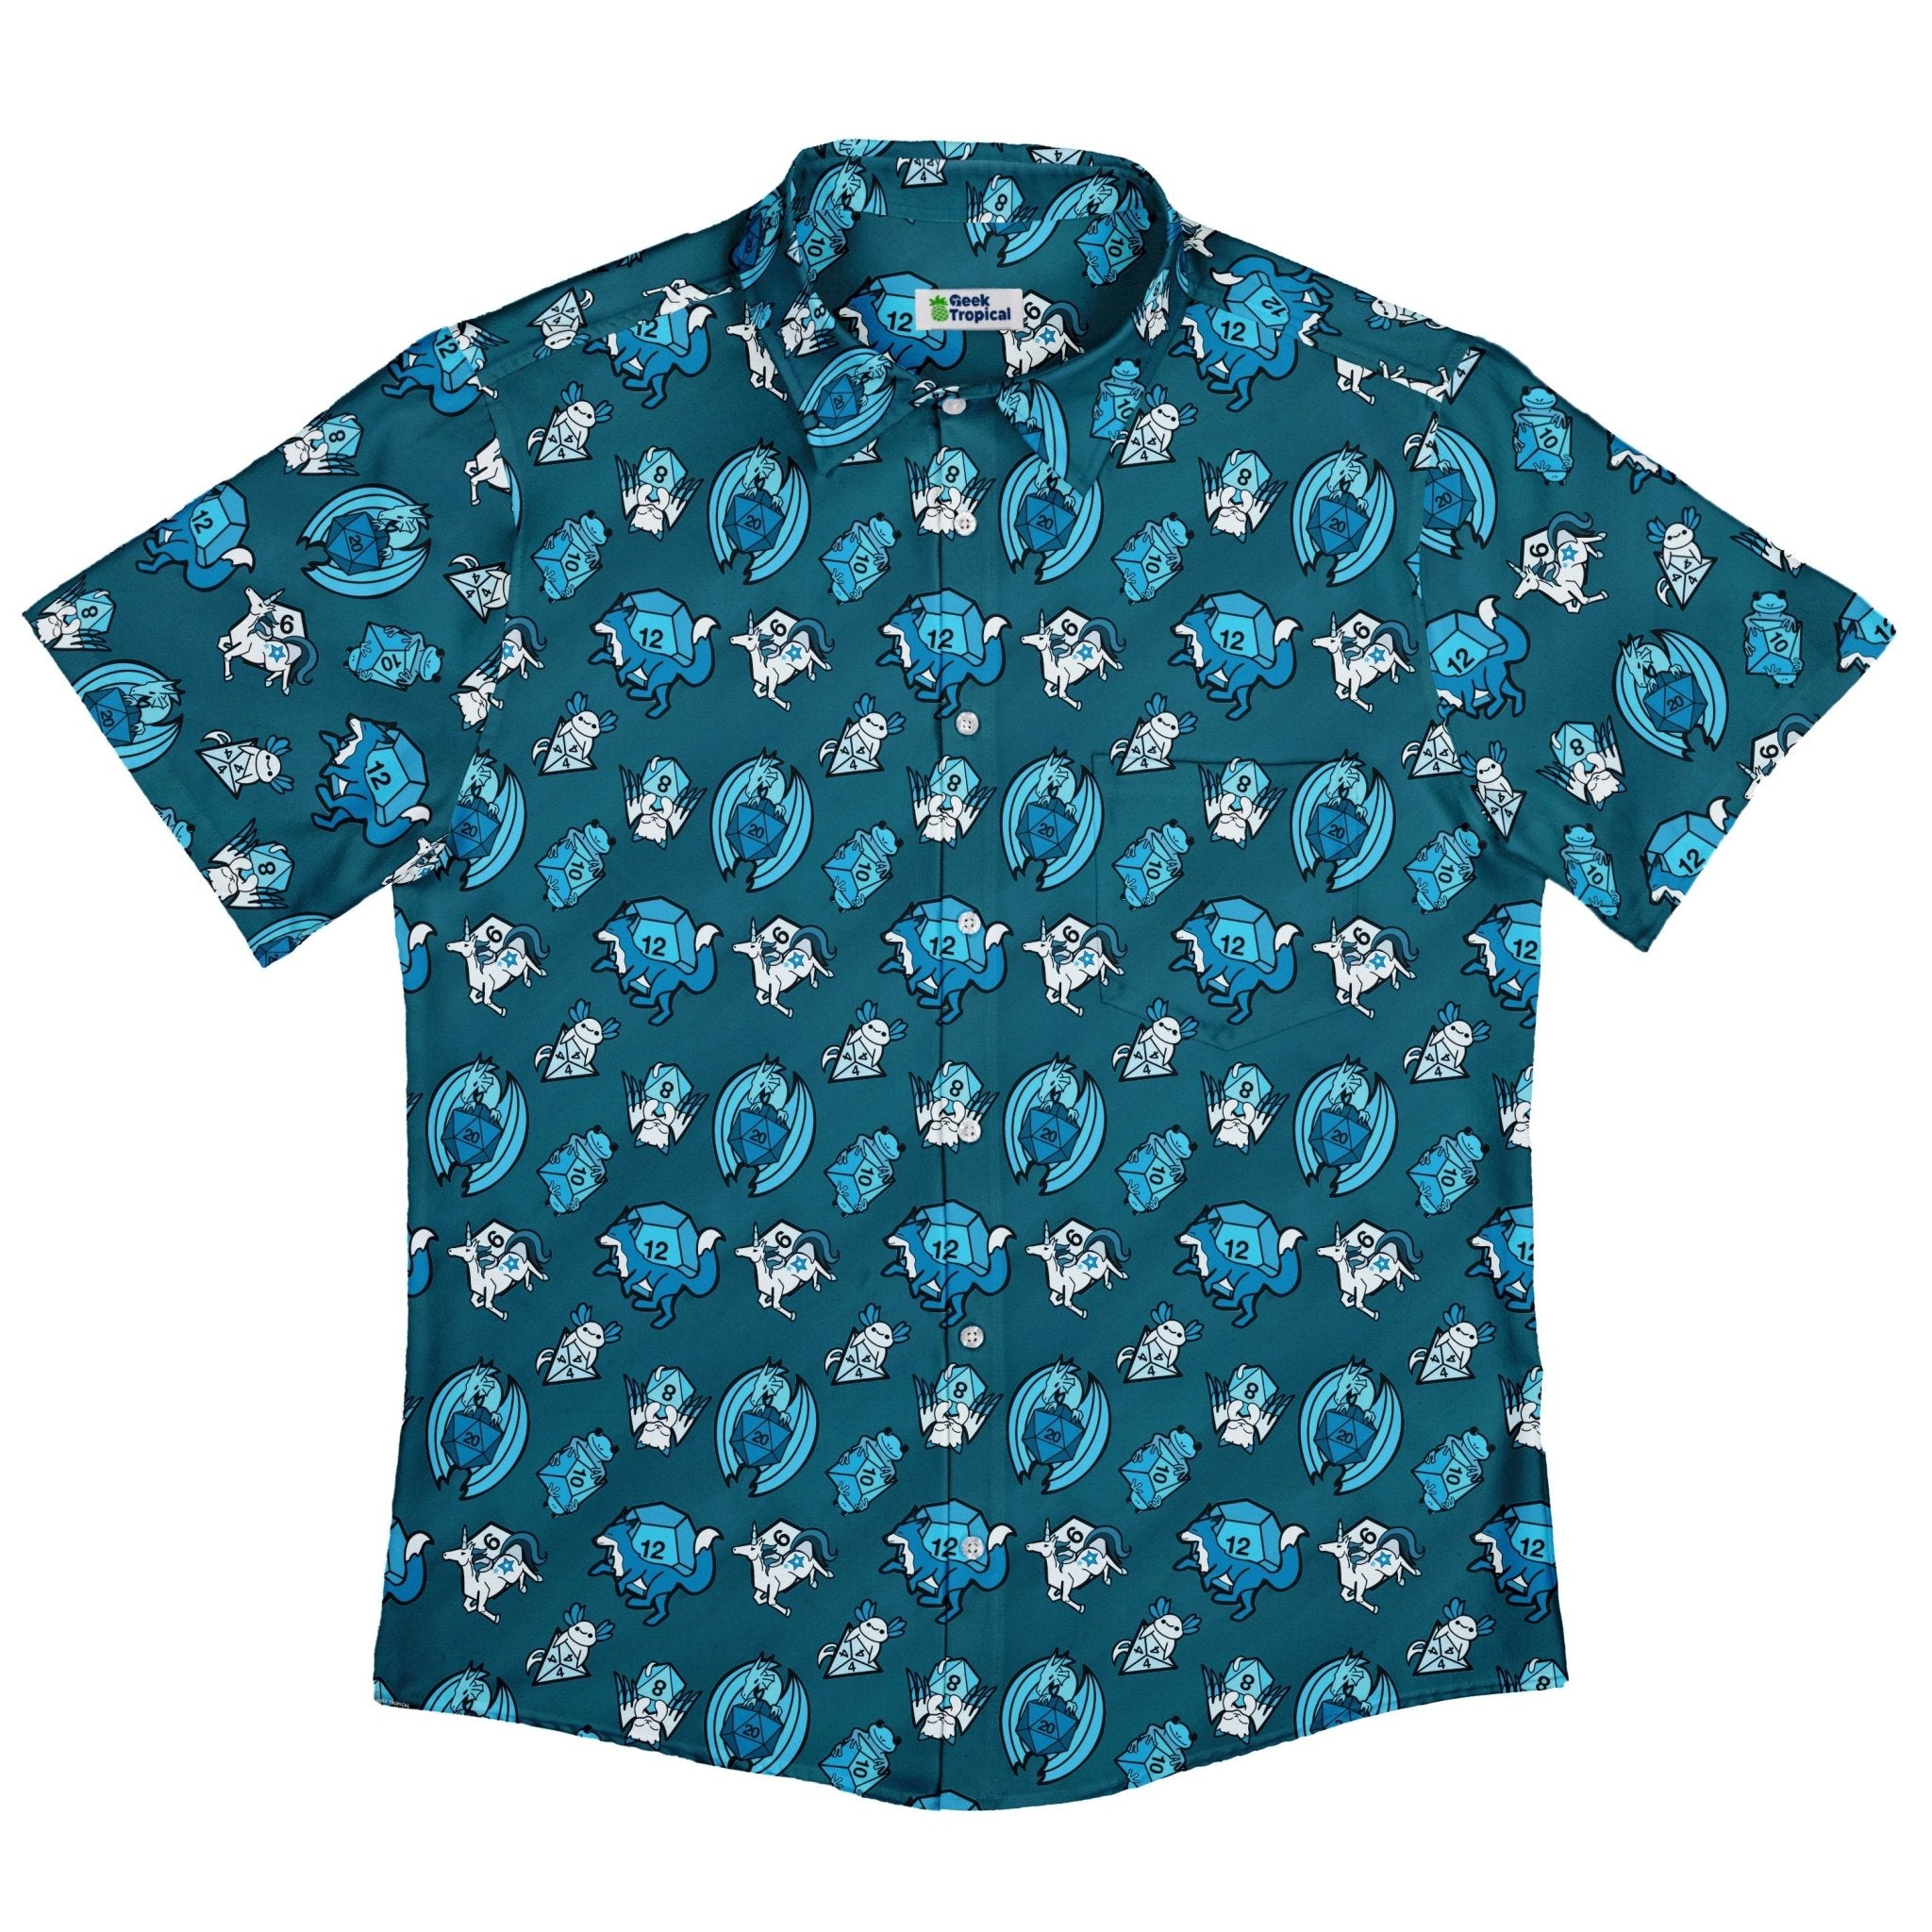 Dice Critters Blue Monochrome Button Up Shirt - adult sizing - Animal Patterns - Designed by Rose Khan